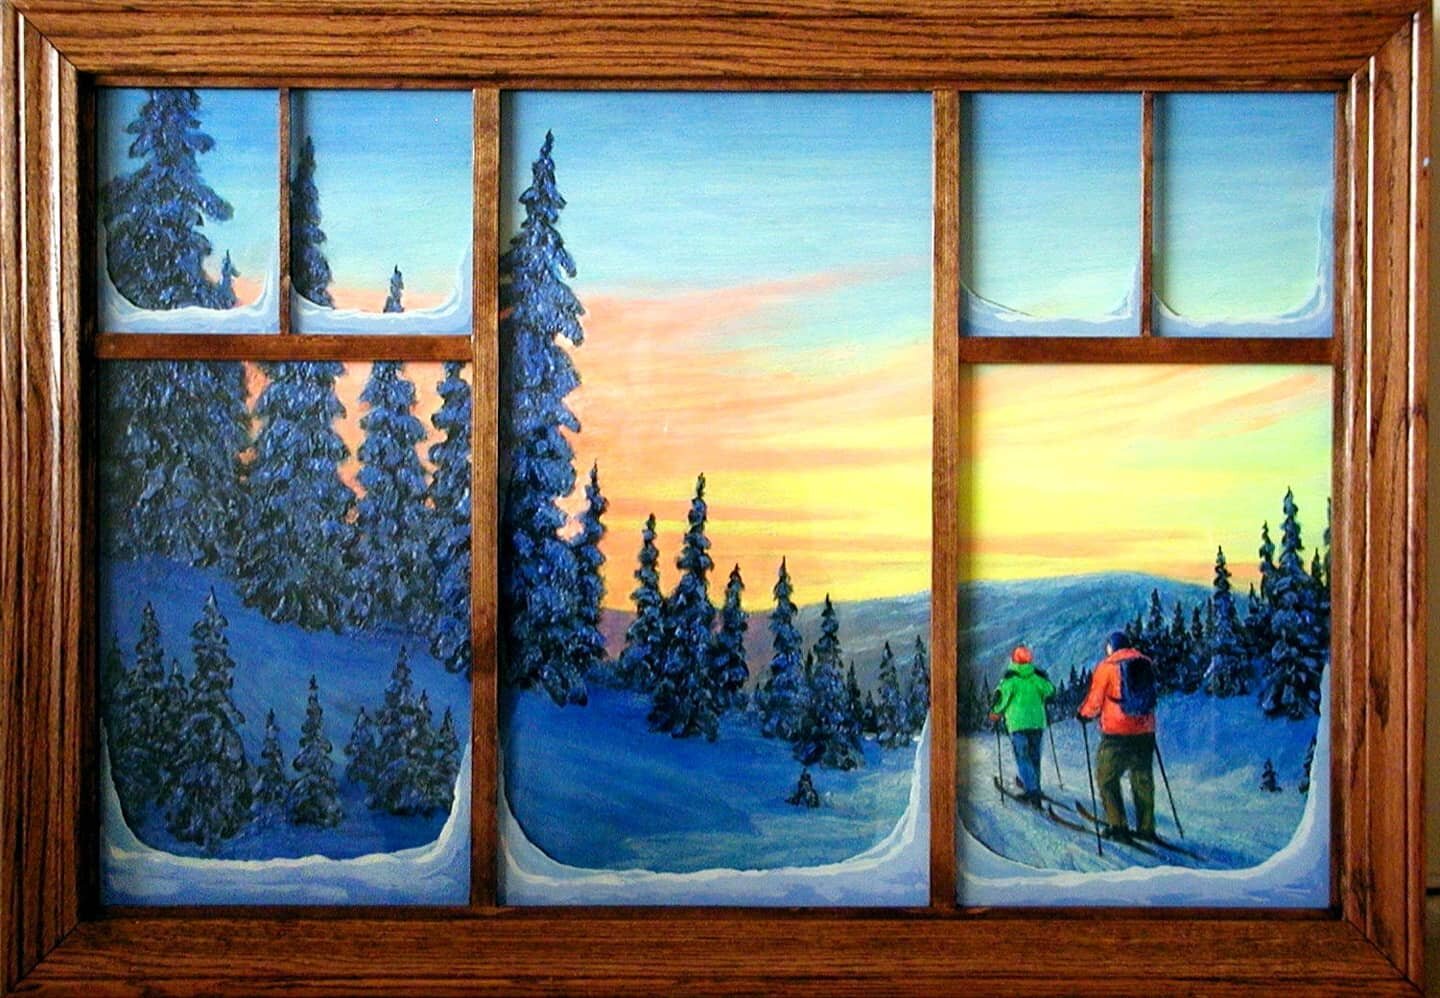 With spring on the way, this incredible piece is perfect for those wishing for a winter view all year round.
.
.
New in 'Cross Country Window Frame' -29&quot;x41&quot;
Ken Farrar - $3100.00
#winter #mountainview #crosscountryskiing #colours #phosphor